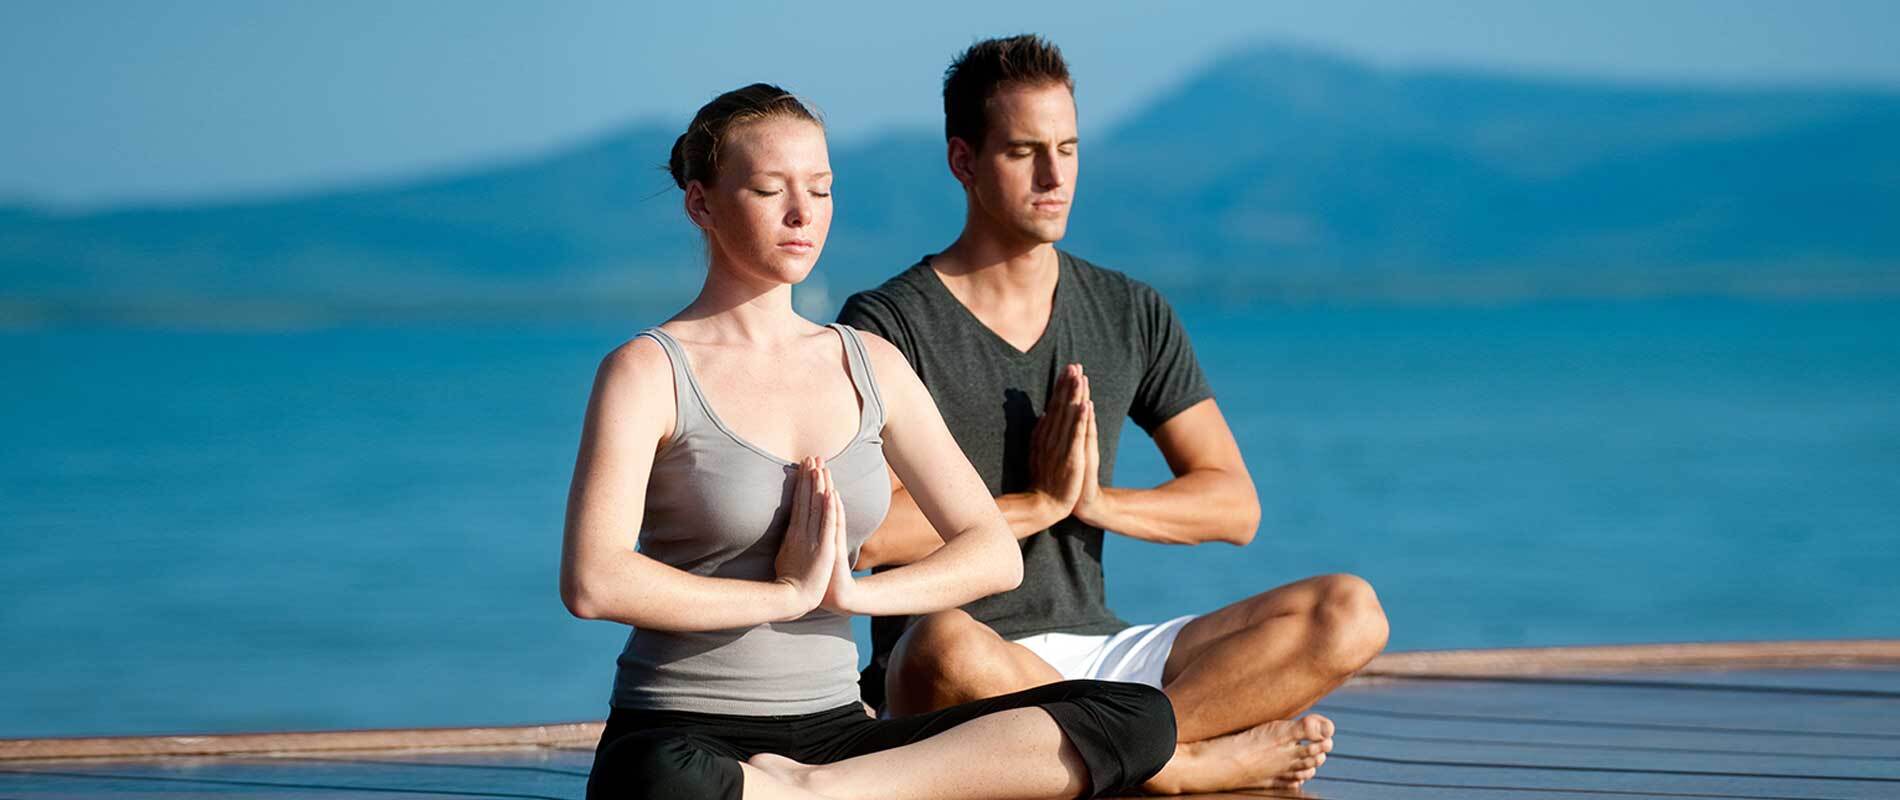 Easy Couples Yoga Poses to Strengthen Your Bond